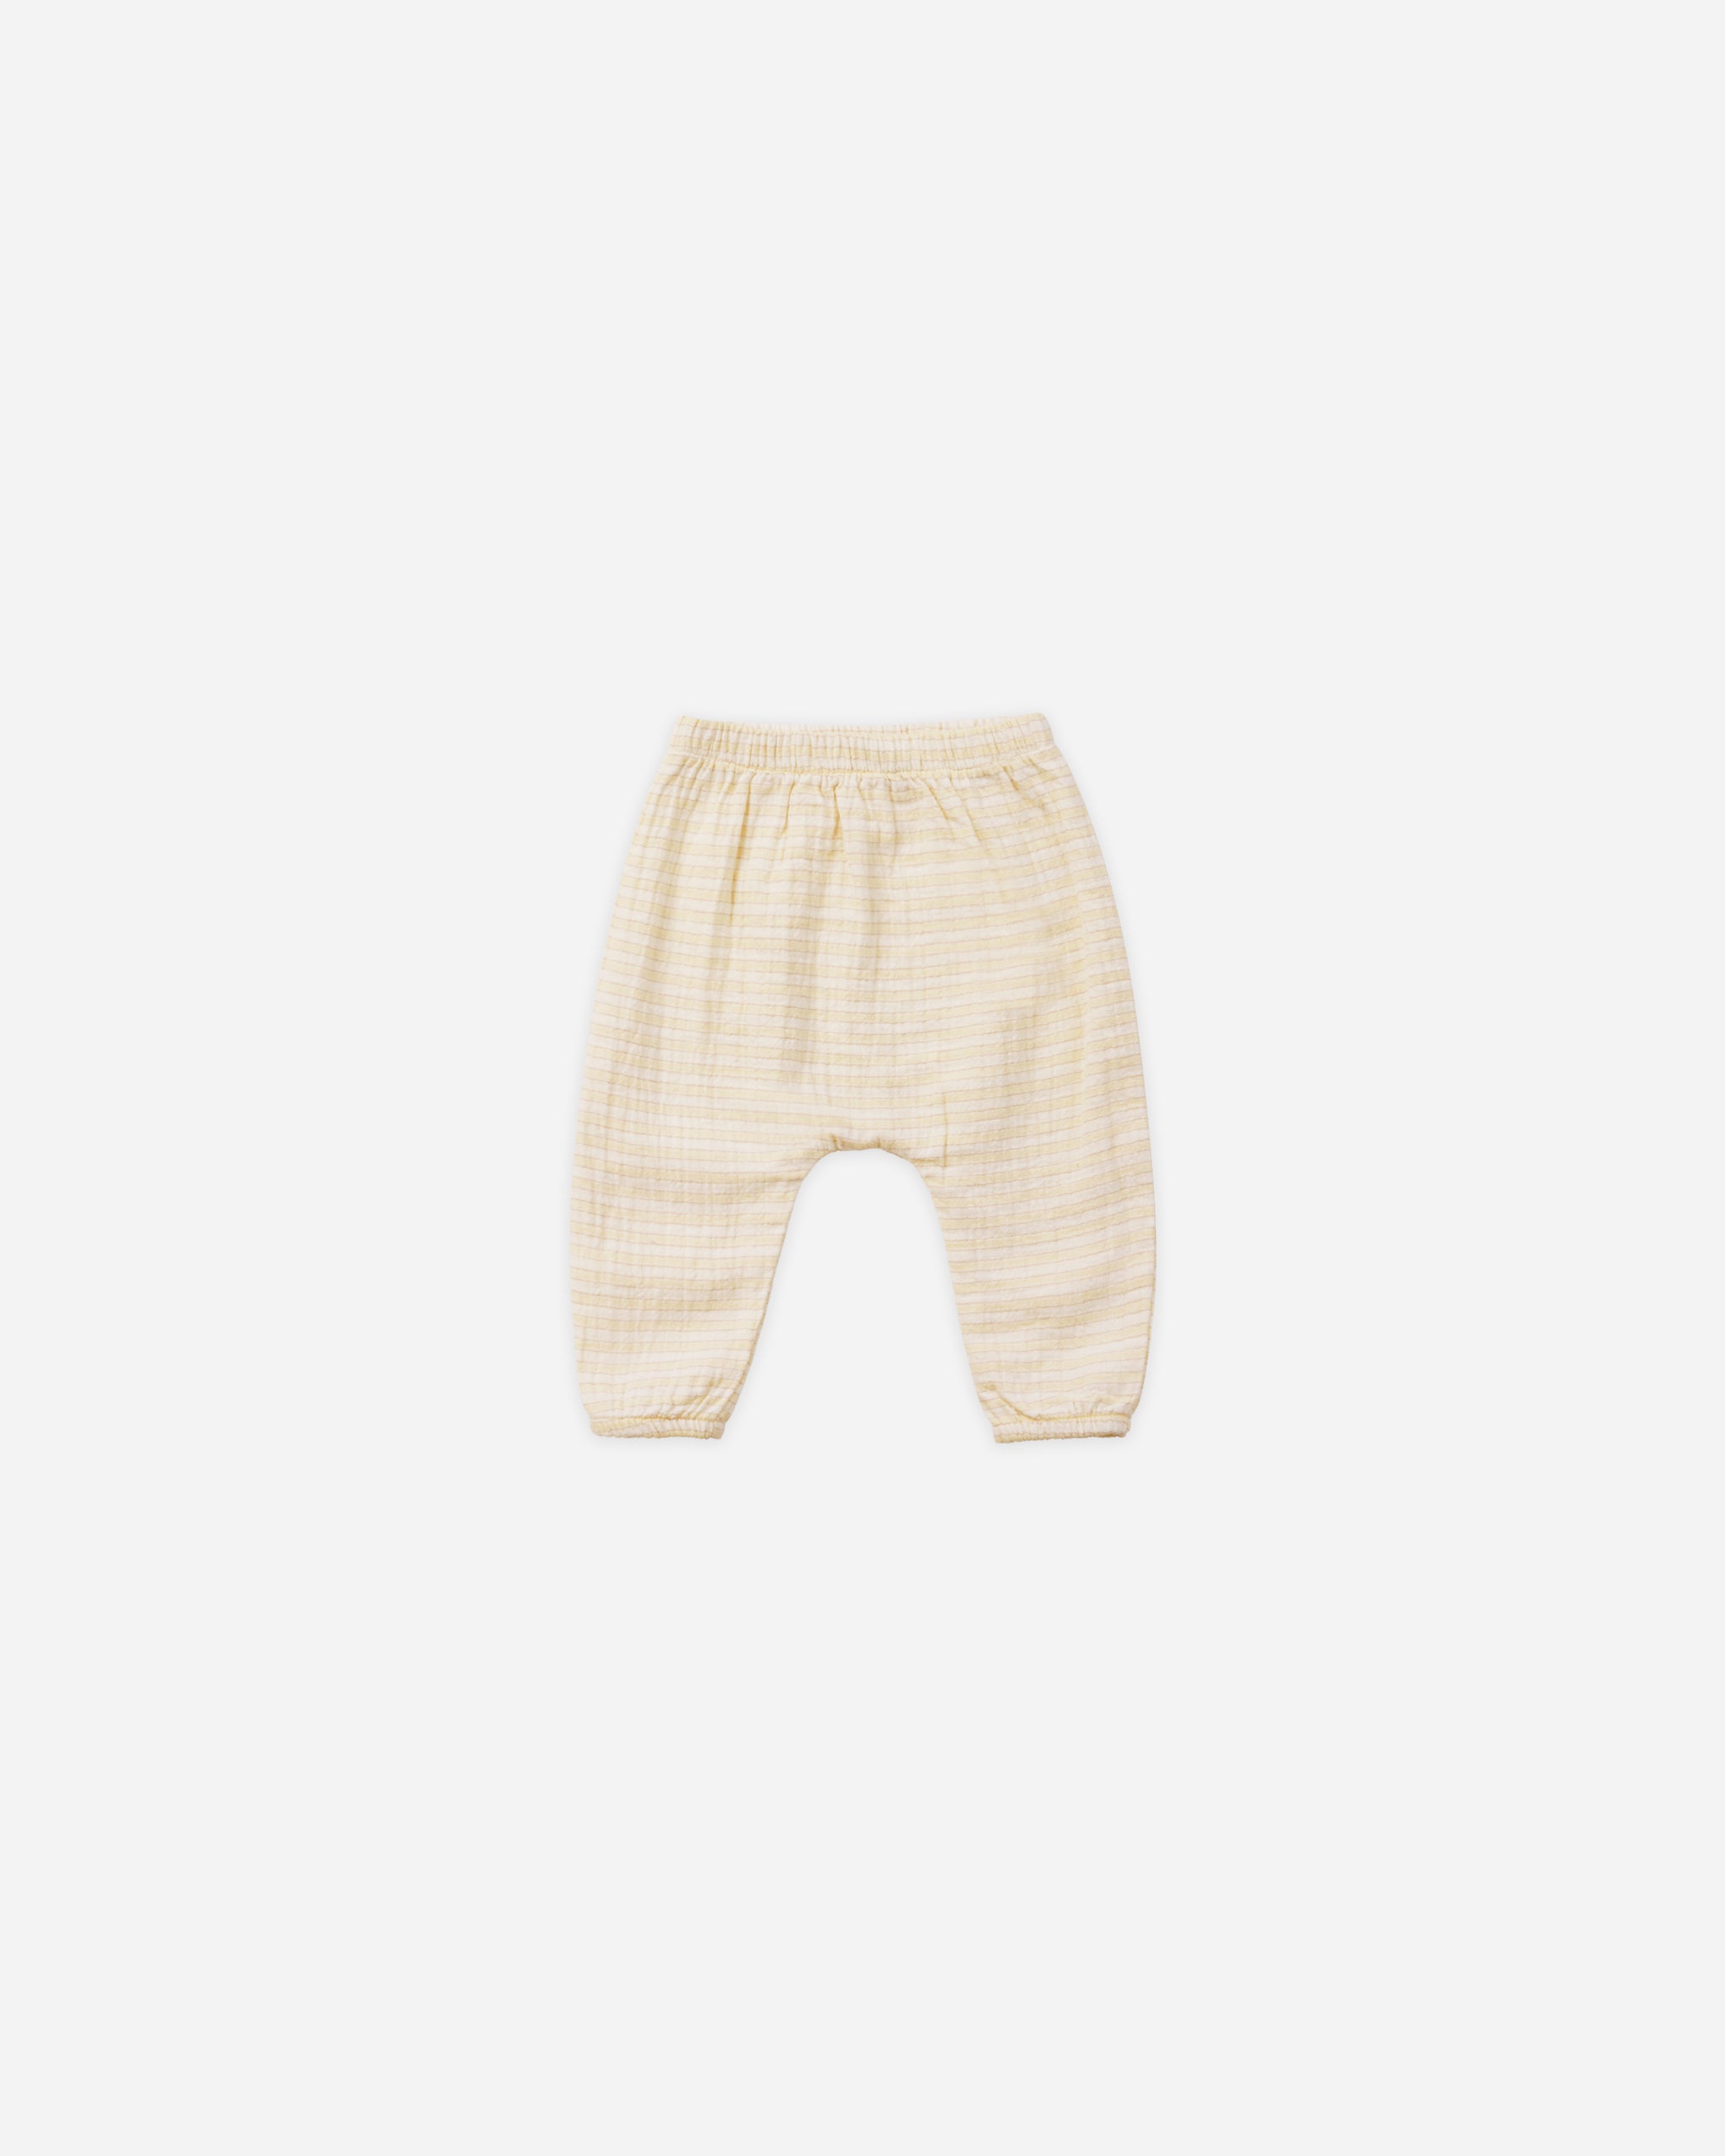 Woven Pant || Lemon Stripe - Rylee + Cru | Kids Clothes | Trendy Baby Clothes | Modern Infant Outfits |